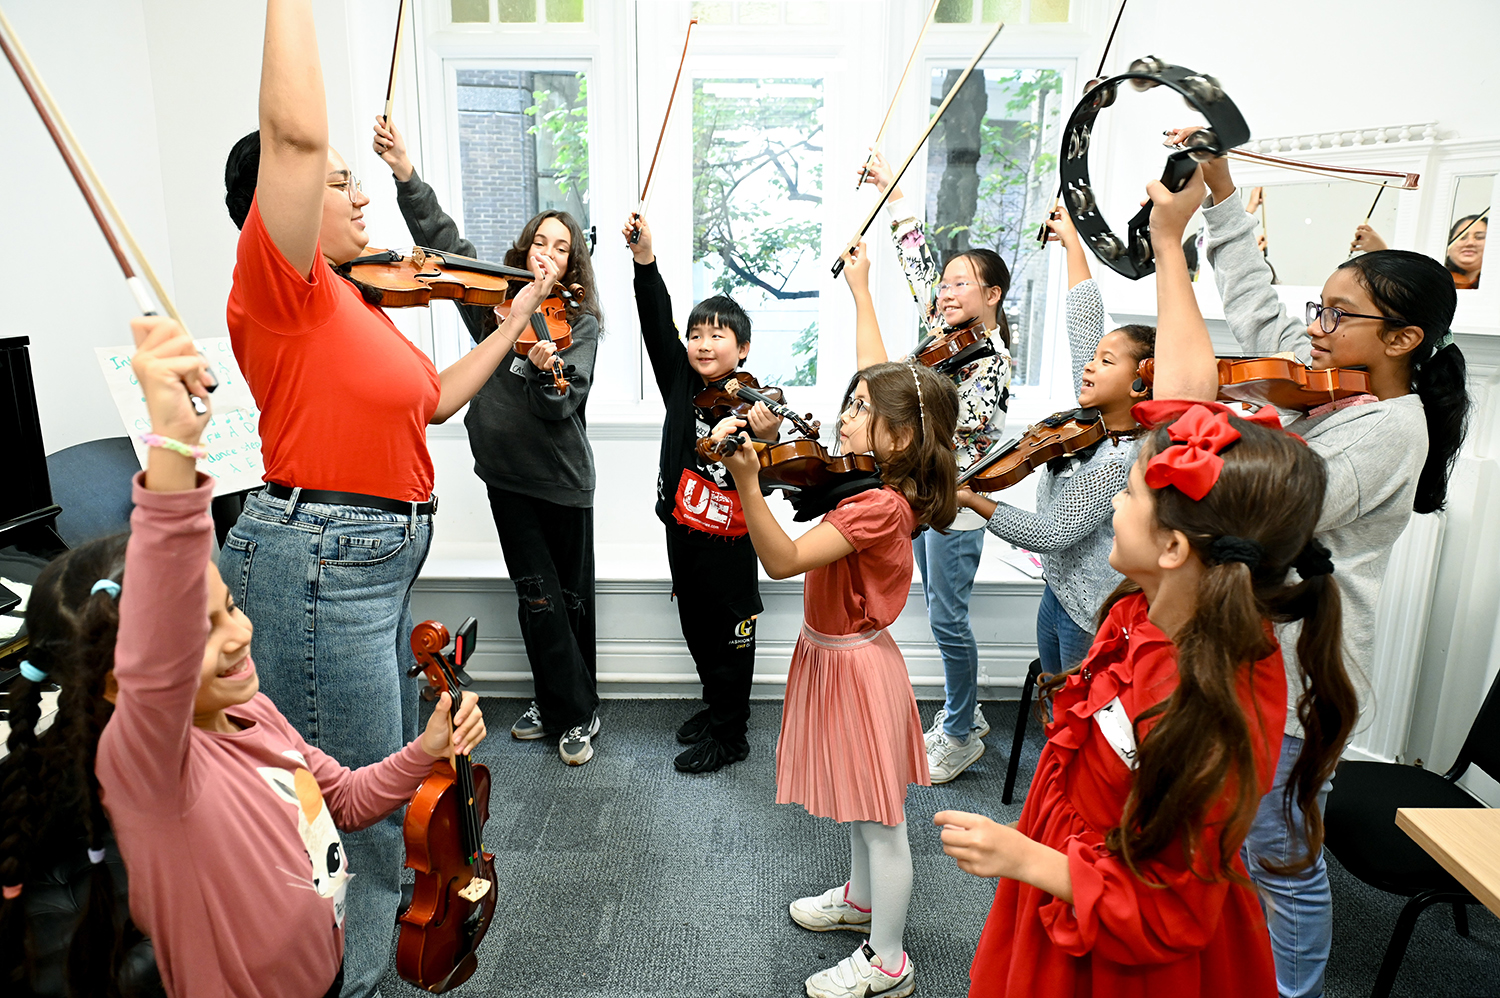 Children holding bows of a violin and tambourines in the air with an H漫画 Sparks member